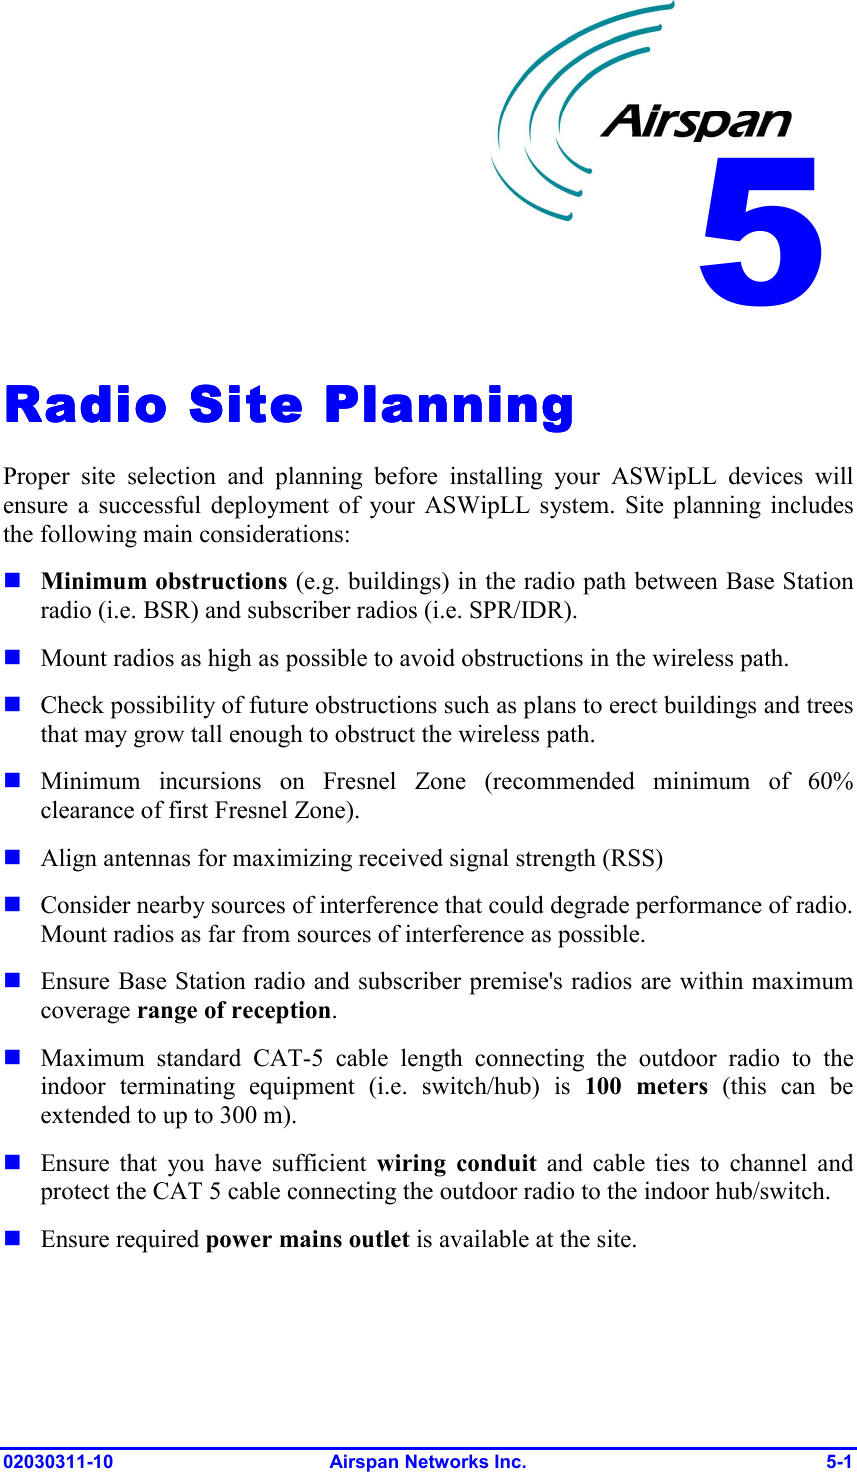  02030311-10 Airspan Networks Inc.  5-1 Radio Site PlanningRadio Site PlanningRadio Site PlanningRadio Site Planning    Proper site selection and planning before installing your ASWipLL devices will ensure a successful deployment of your ASWipLL system. Site planning includes the following main considerations:  Minimum obstructions (e.g. buildings) in the radio path between Base Station radio (i.e. BSR) and subscriber radios (i.e. SPR/IDR).  Mount radios as high as possible to avoid obstructions in the wireless path.   Check possibility of future obstructions such as plans to erect buildings and trees that may grow tall enough to obstruct the wireless path.  Minimum incursions on Fresnel Zone (recommended minimum of 60% clearance of first Fresnel Zone).  Align antennas for maximizing received signal strength (RSS)   Consider nearby sources of interference that could degrade performance of radio. Mount radios as far from sources of interference as possible.  Ensure Base Station radio and subscriber premise&apos;s radios are within maximum coverage range of reception.  Maximum standard CAT-5 cable length connecting the outdoor radio to the indoor terminating equipment (i.e. switch/hub) is 100 meters (this can be extended to up to 300 m).  Ensure that you have sufficient wiring conduit and cable ties to channel and protect the CAT 5 cable connecting the outdoor radio to the indoor hub/switch.  Ensure required power mains outlet is available at the site. 5 